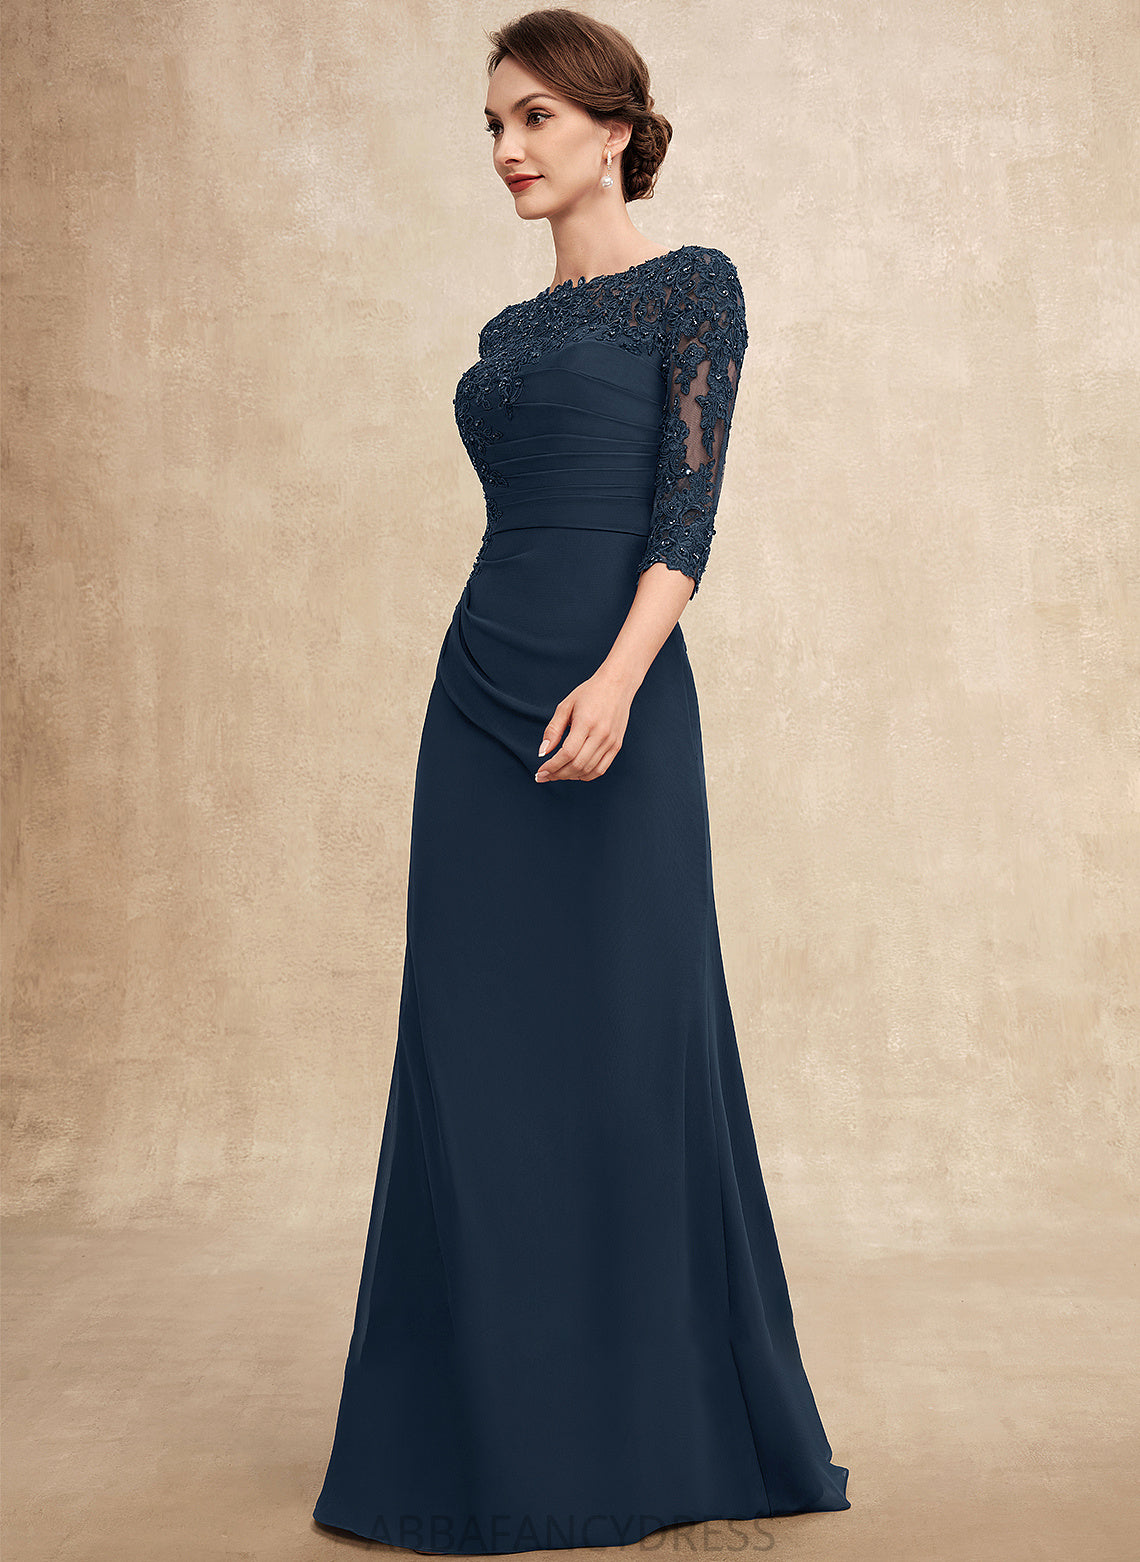 Floor-Length With Beading Neck A-Line Dress Lace Scoop Chiffon Ruffle Sequins Bride Mother the Natalia of Mother of the Bride Dresses